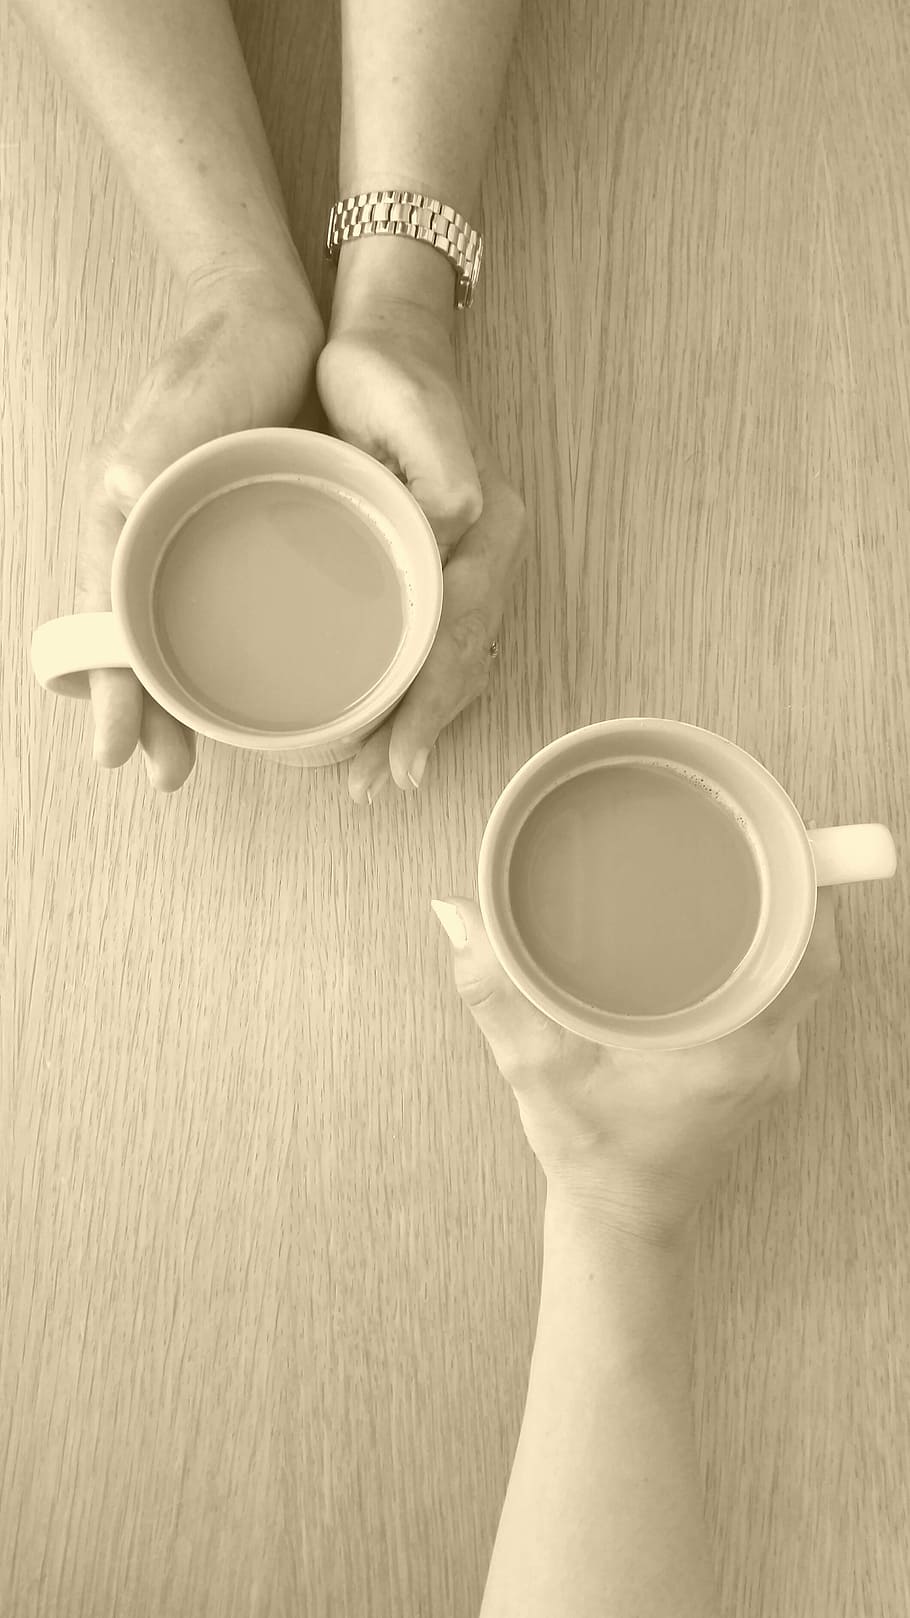 photographed, two, person, holding, mugs, coffee, chat, conversation, cups, hands